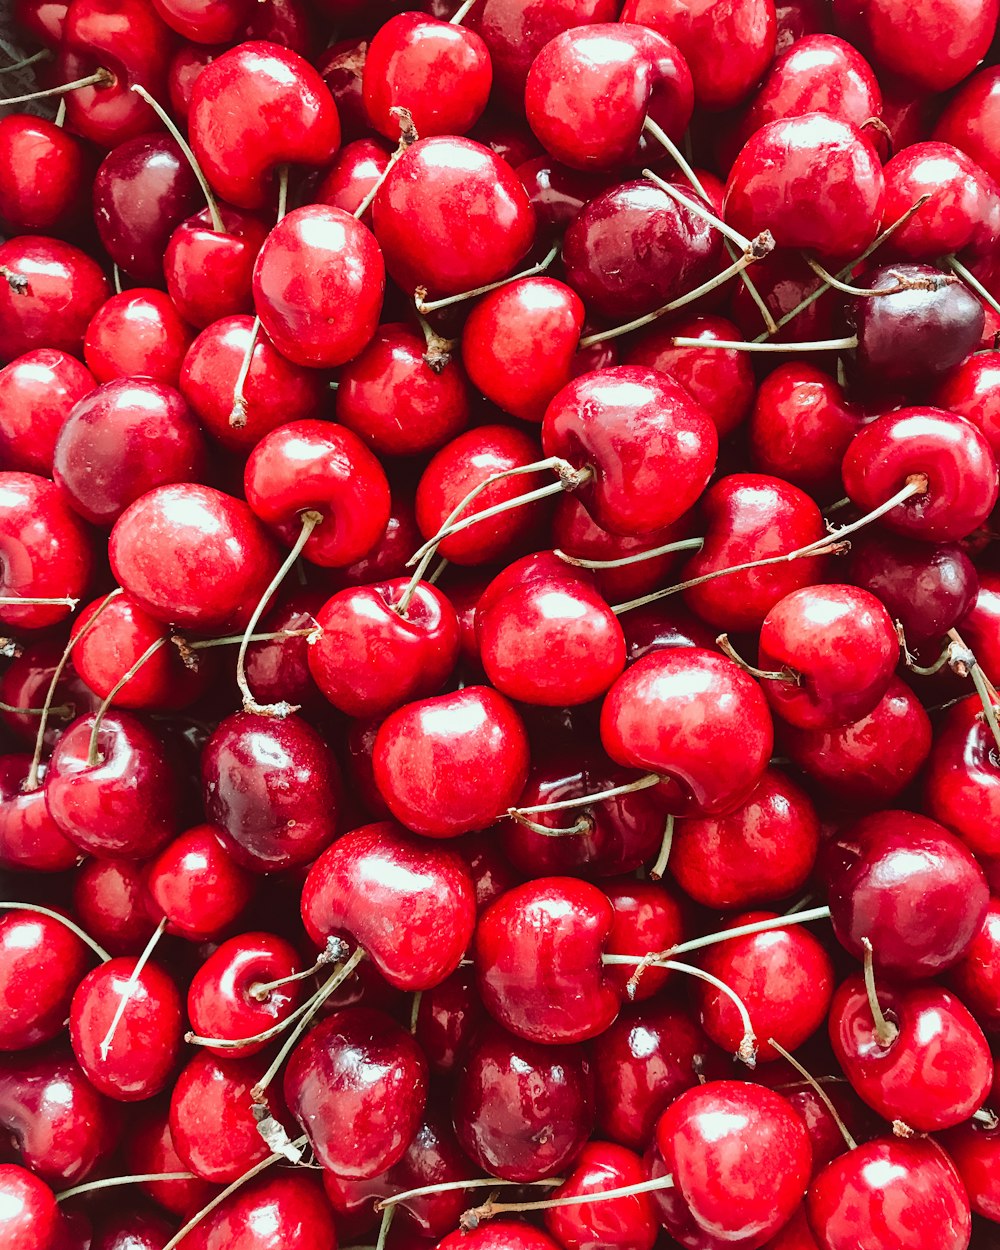 red cherries in close up photography